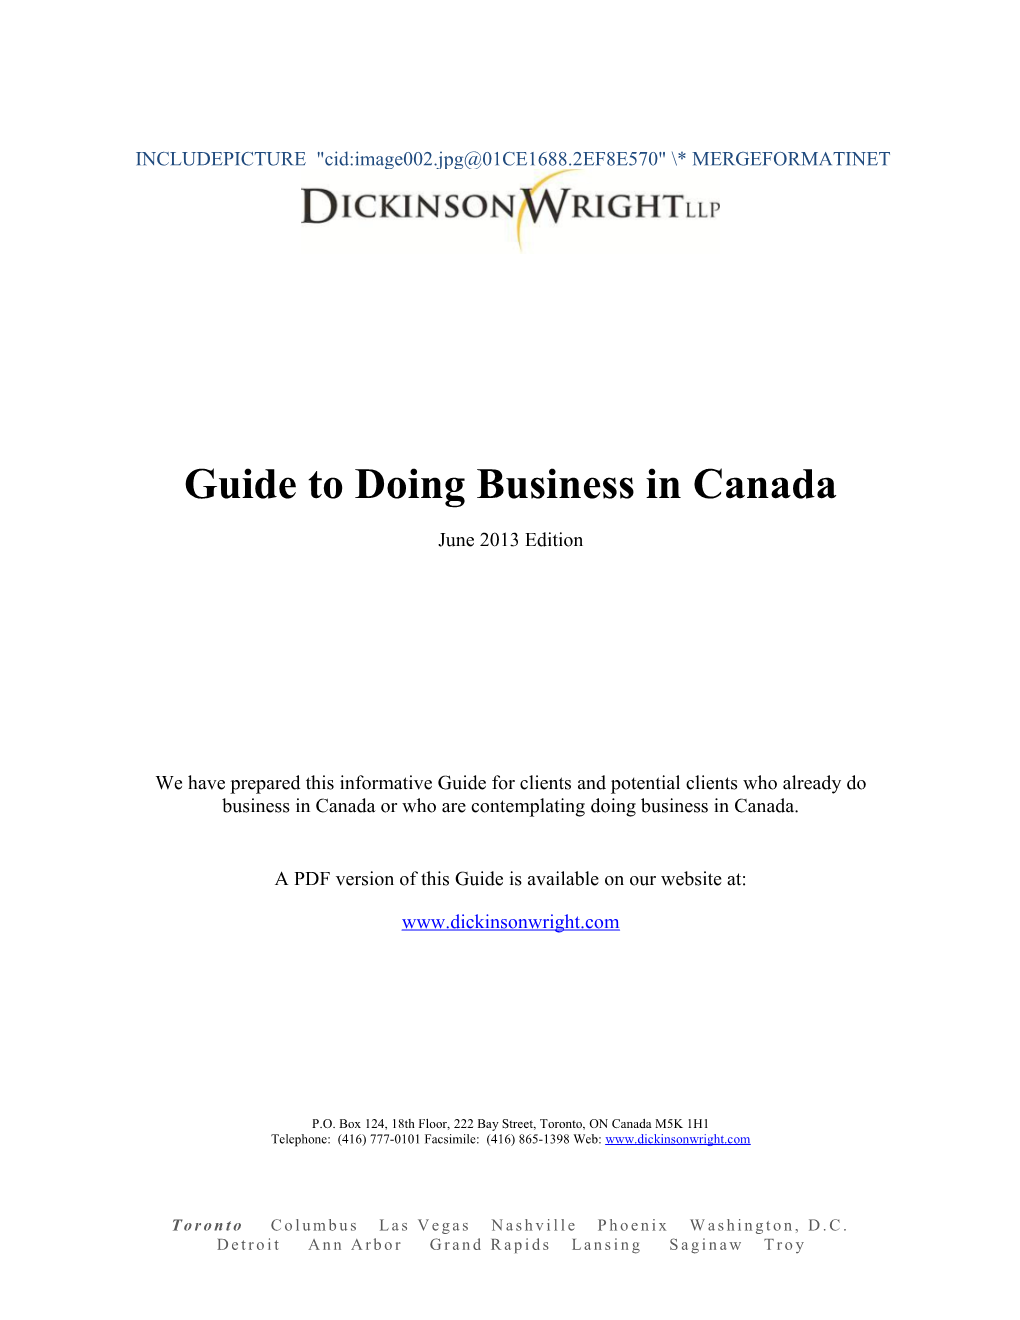 Guide to Doing Business in Canada